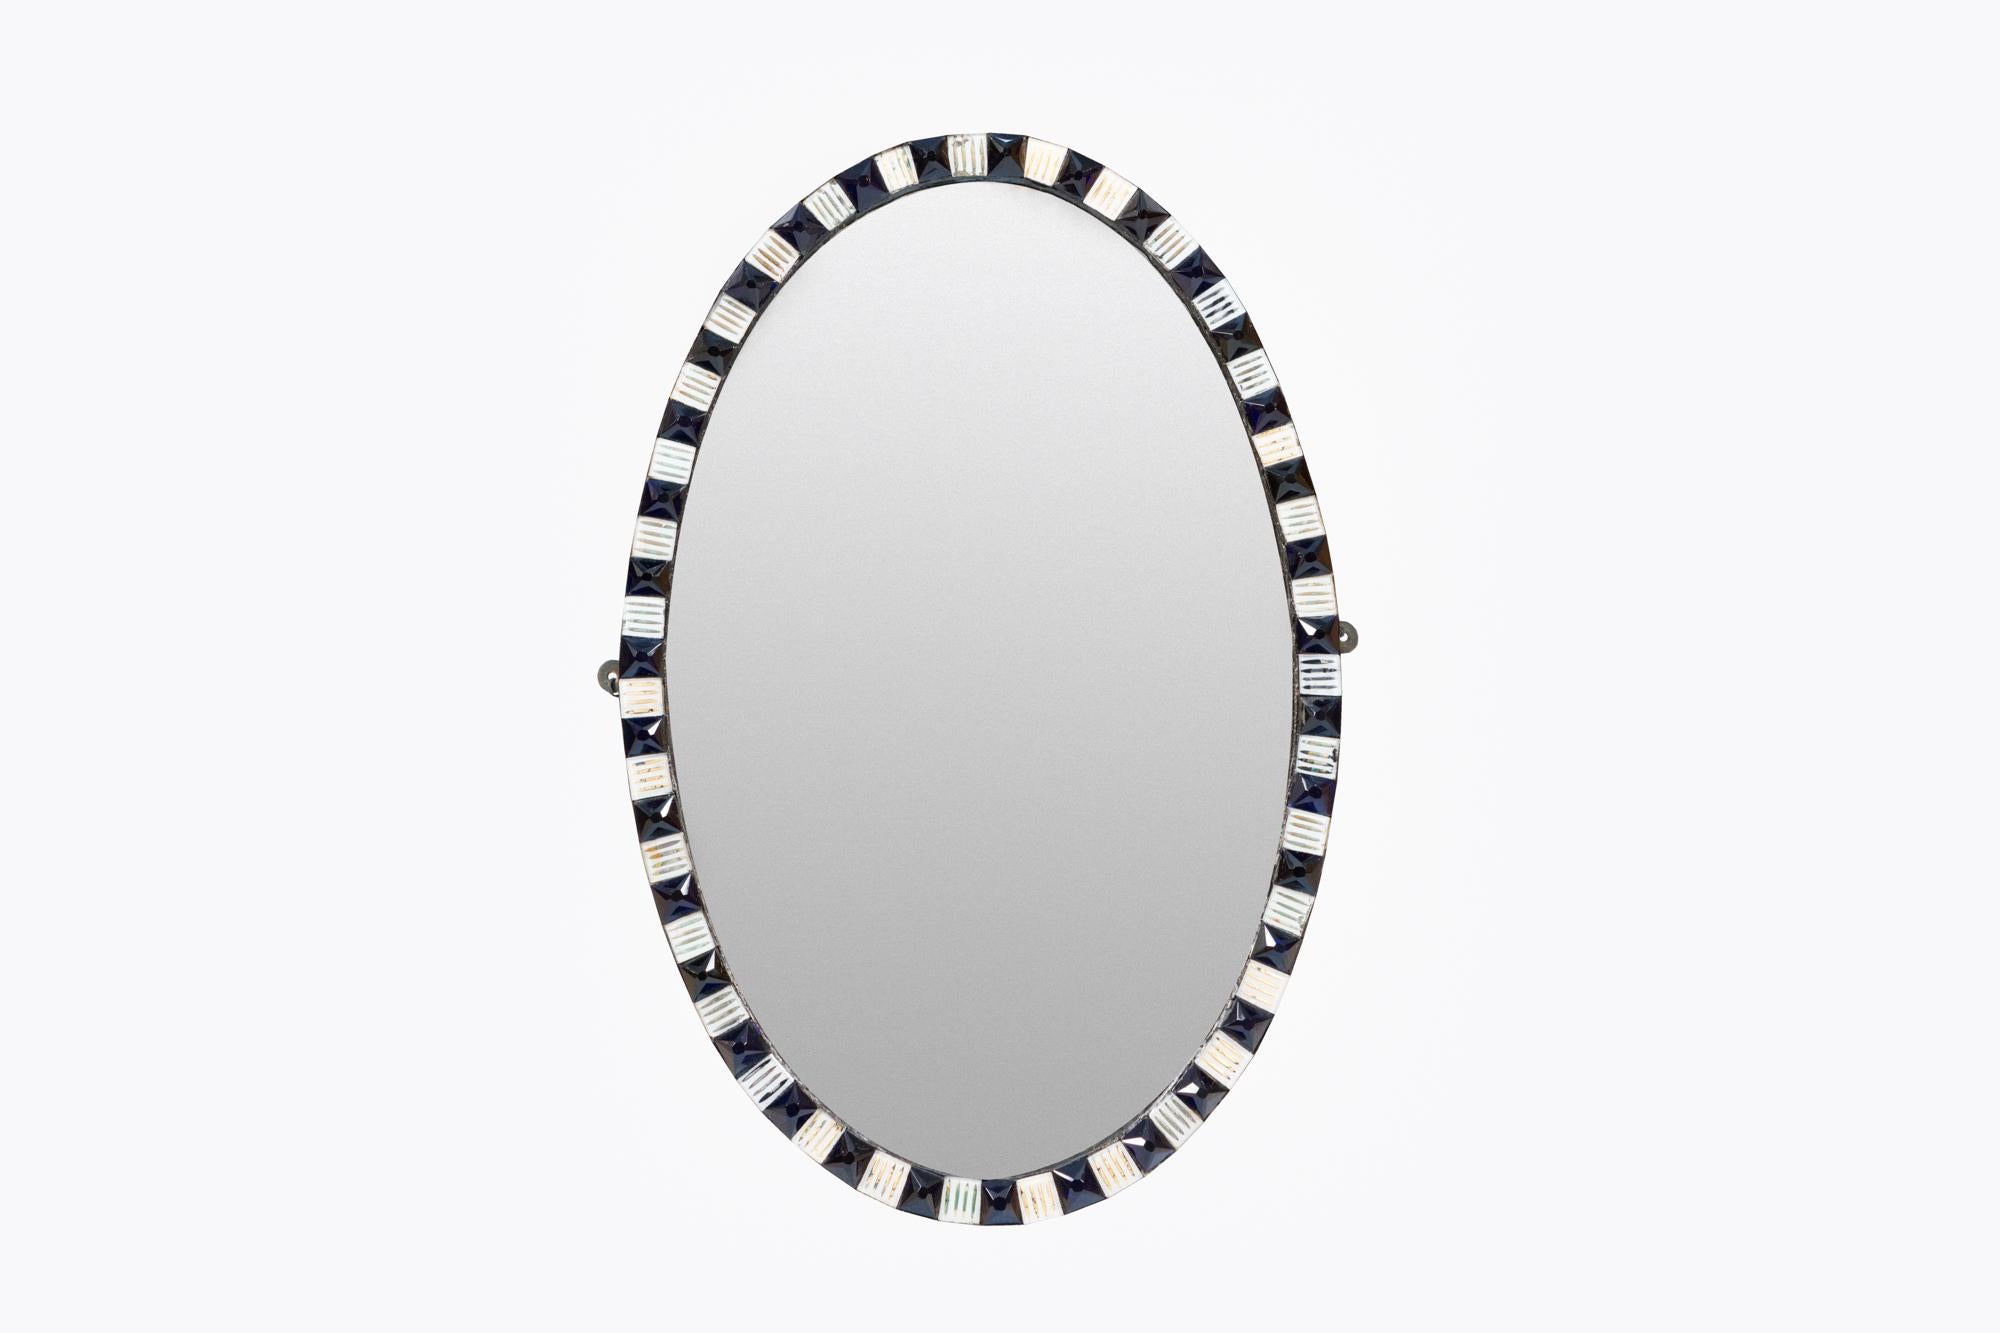 18th century Irish Waterford mirror, the period plate of oval form set within frame of alternating faceted blue and clear glass studs.